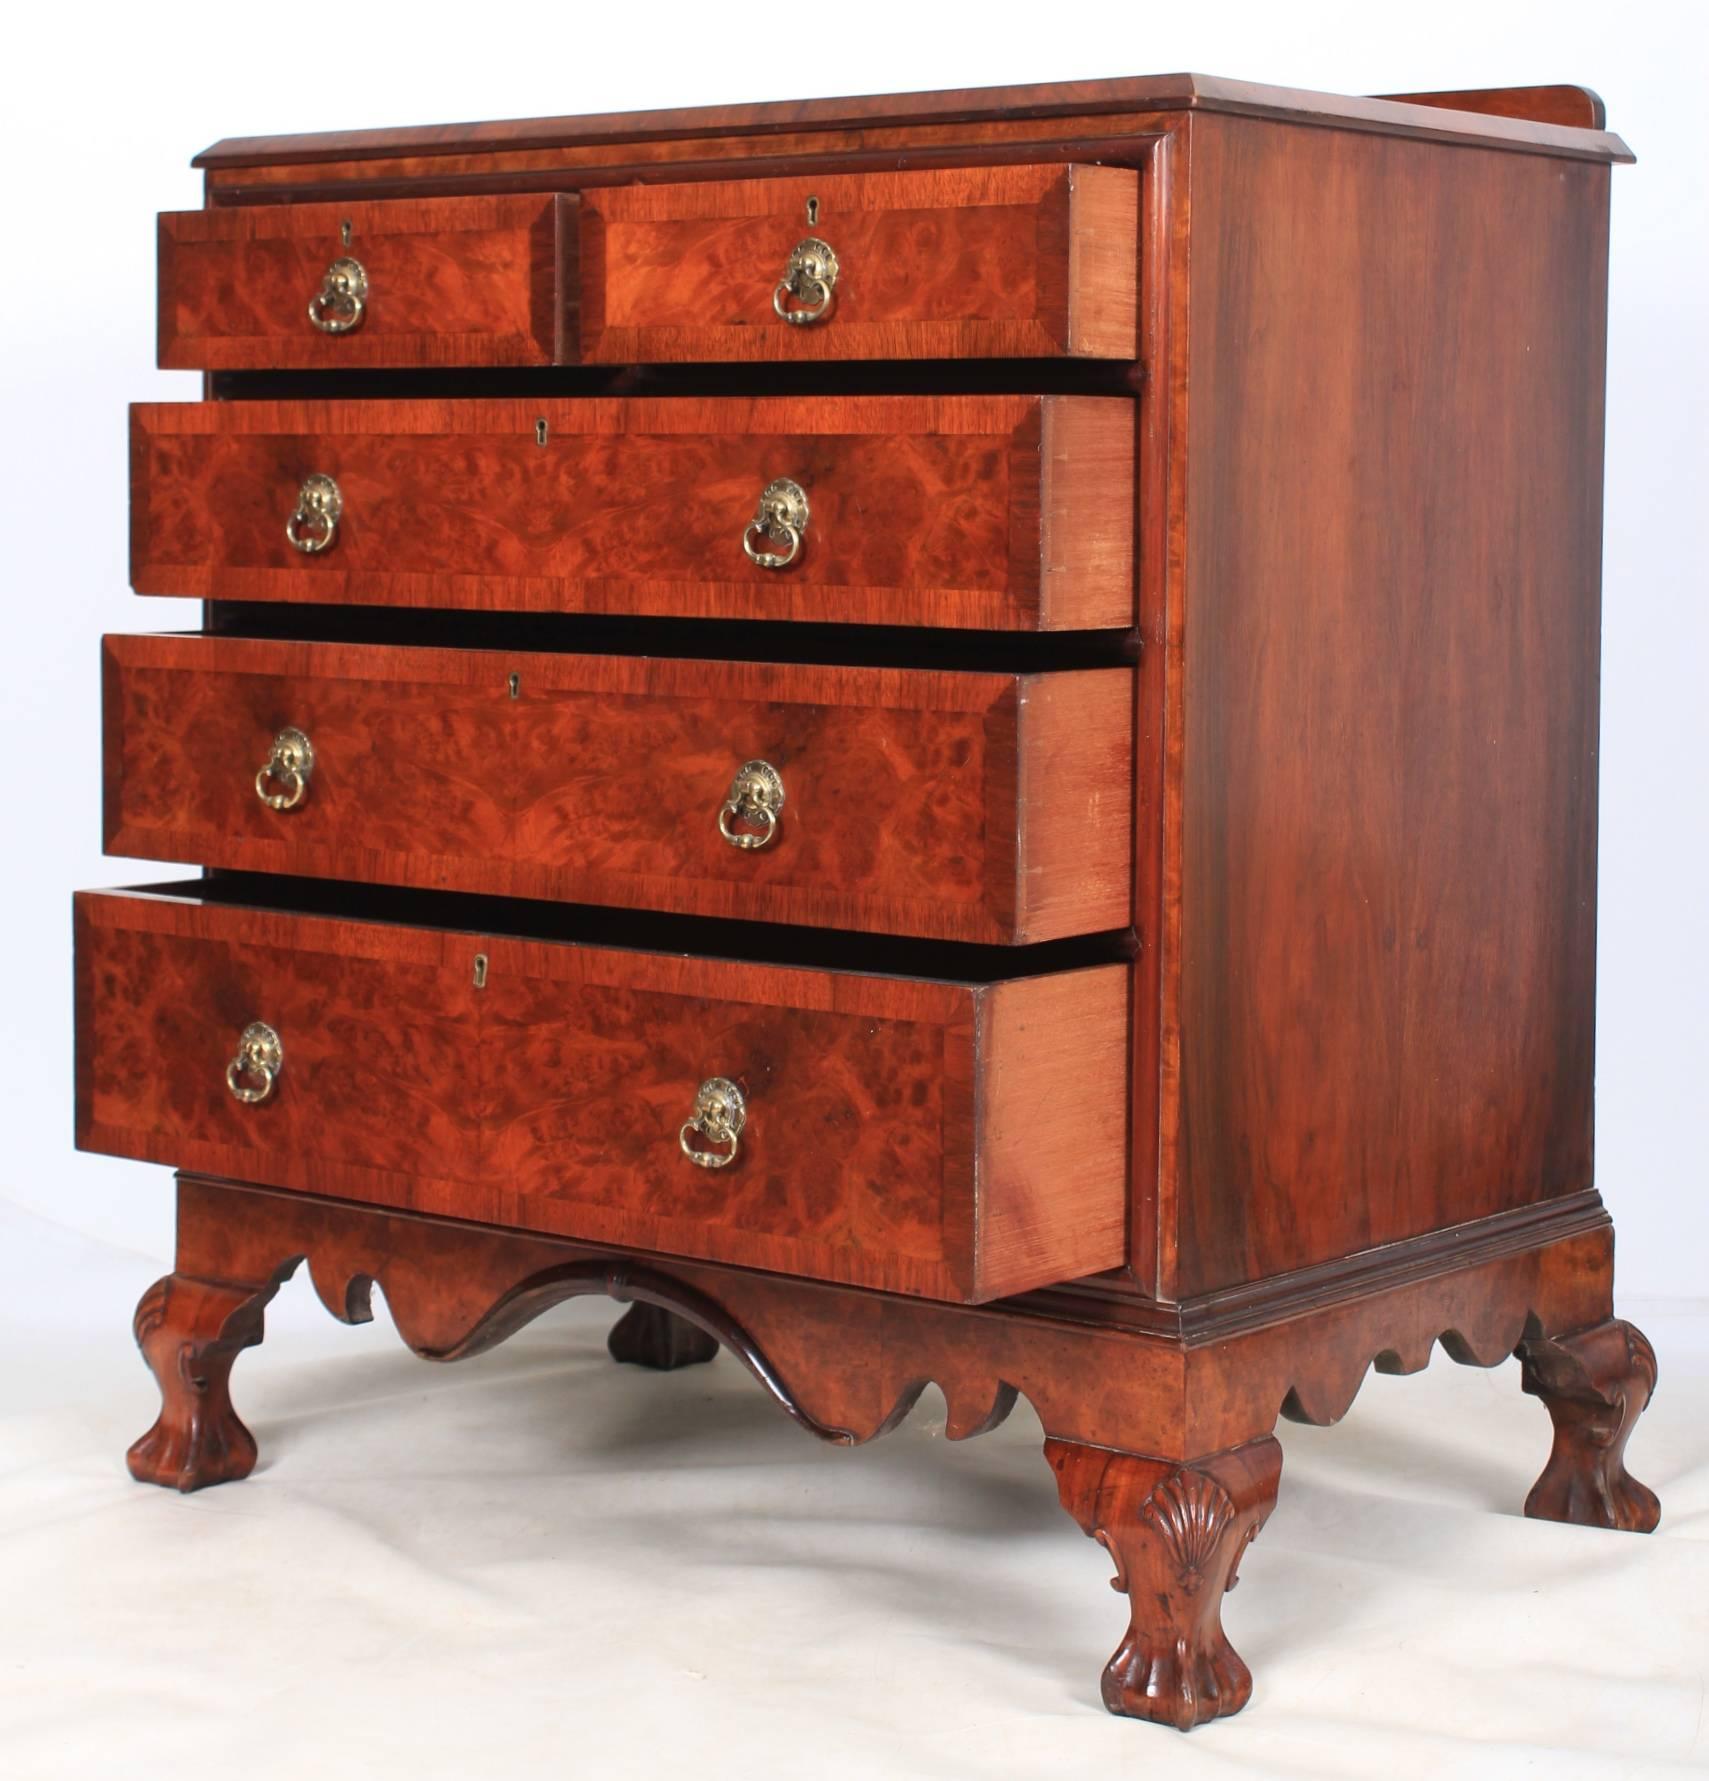 English, circa 1920.
This burr walnut chest is in superb condition.
A beautiful colour burr walnut top over two small and three long graduated drawers.
The drawers are of solid mahogany dovetailed construction, with crossbanded fronts and brass